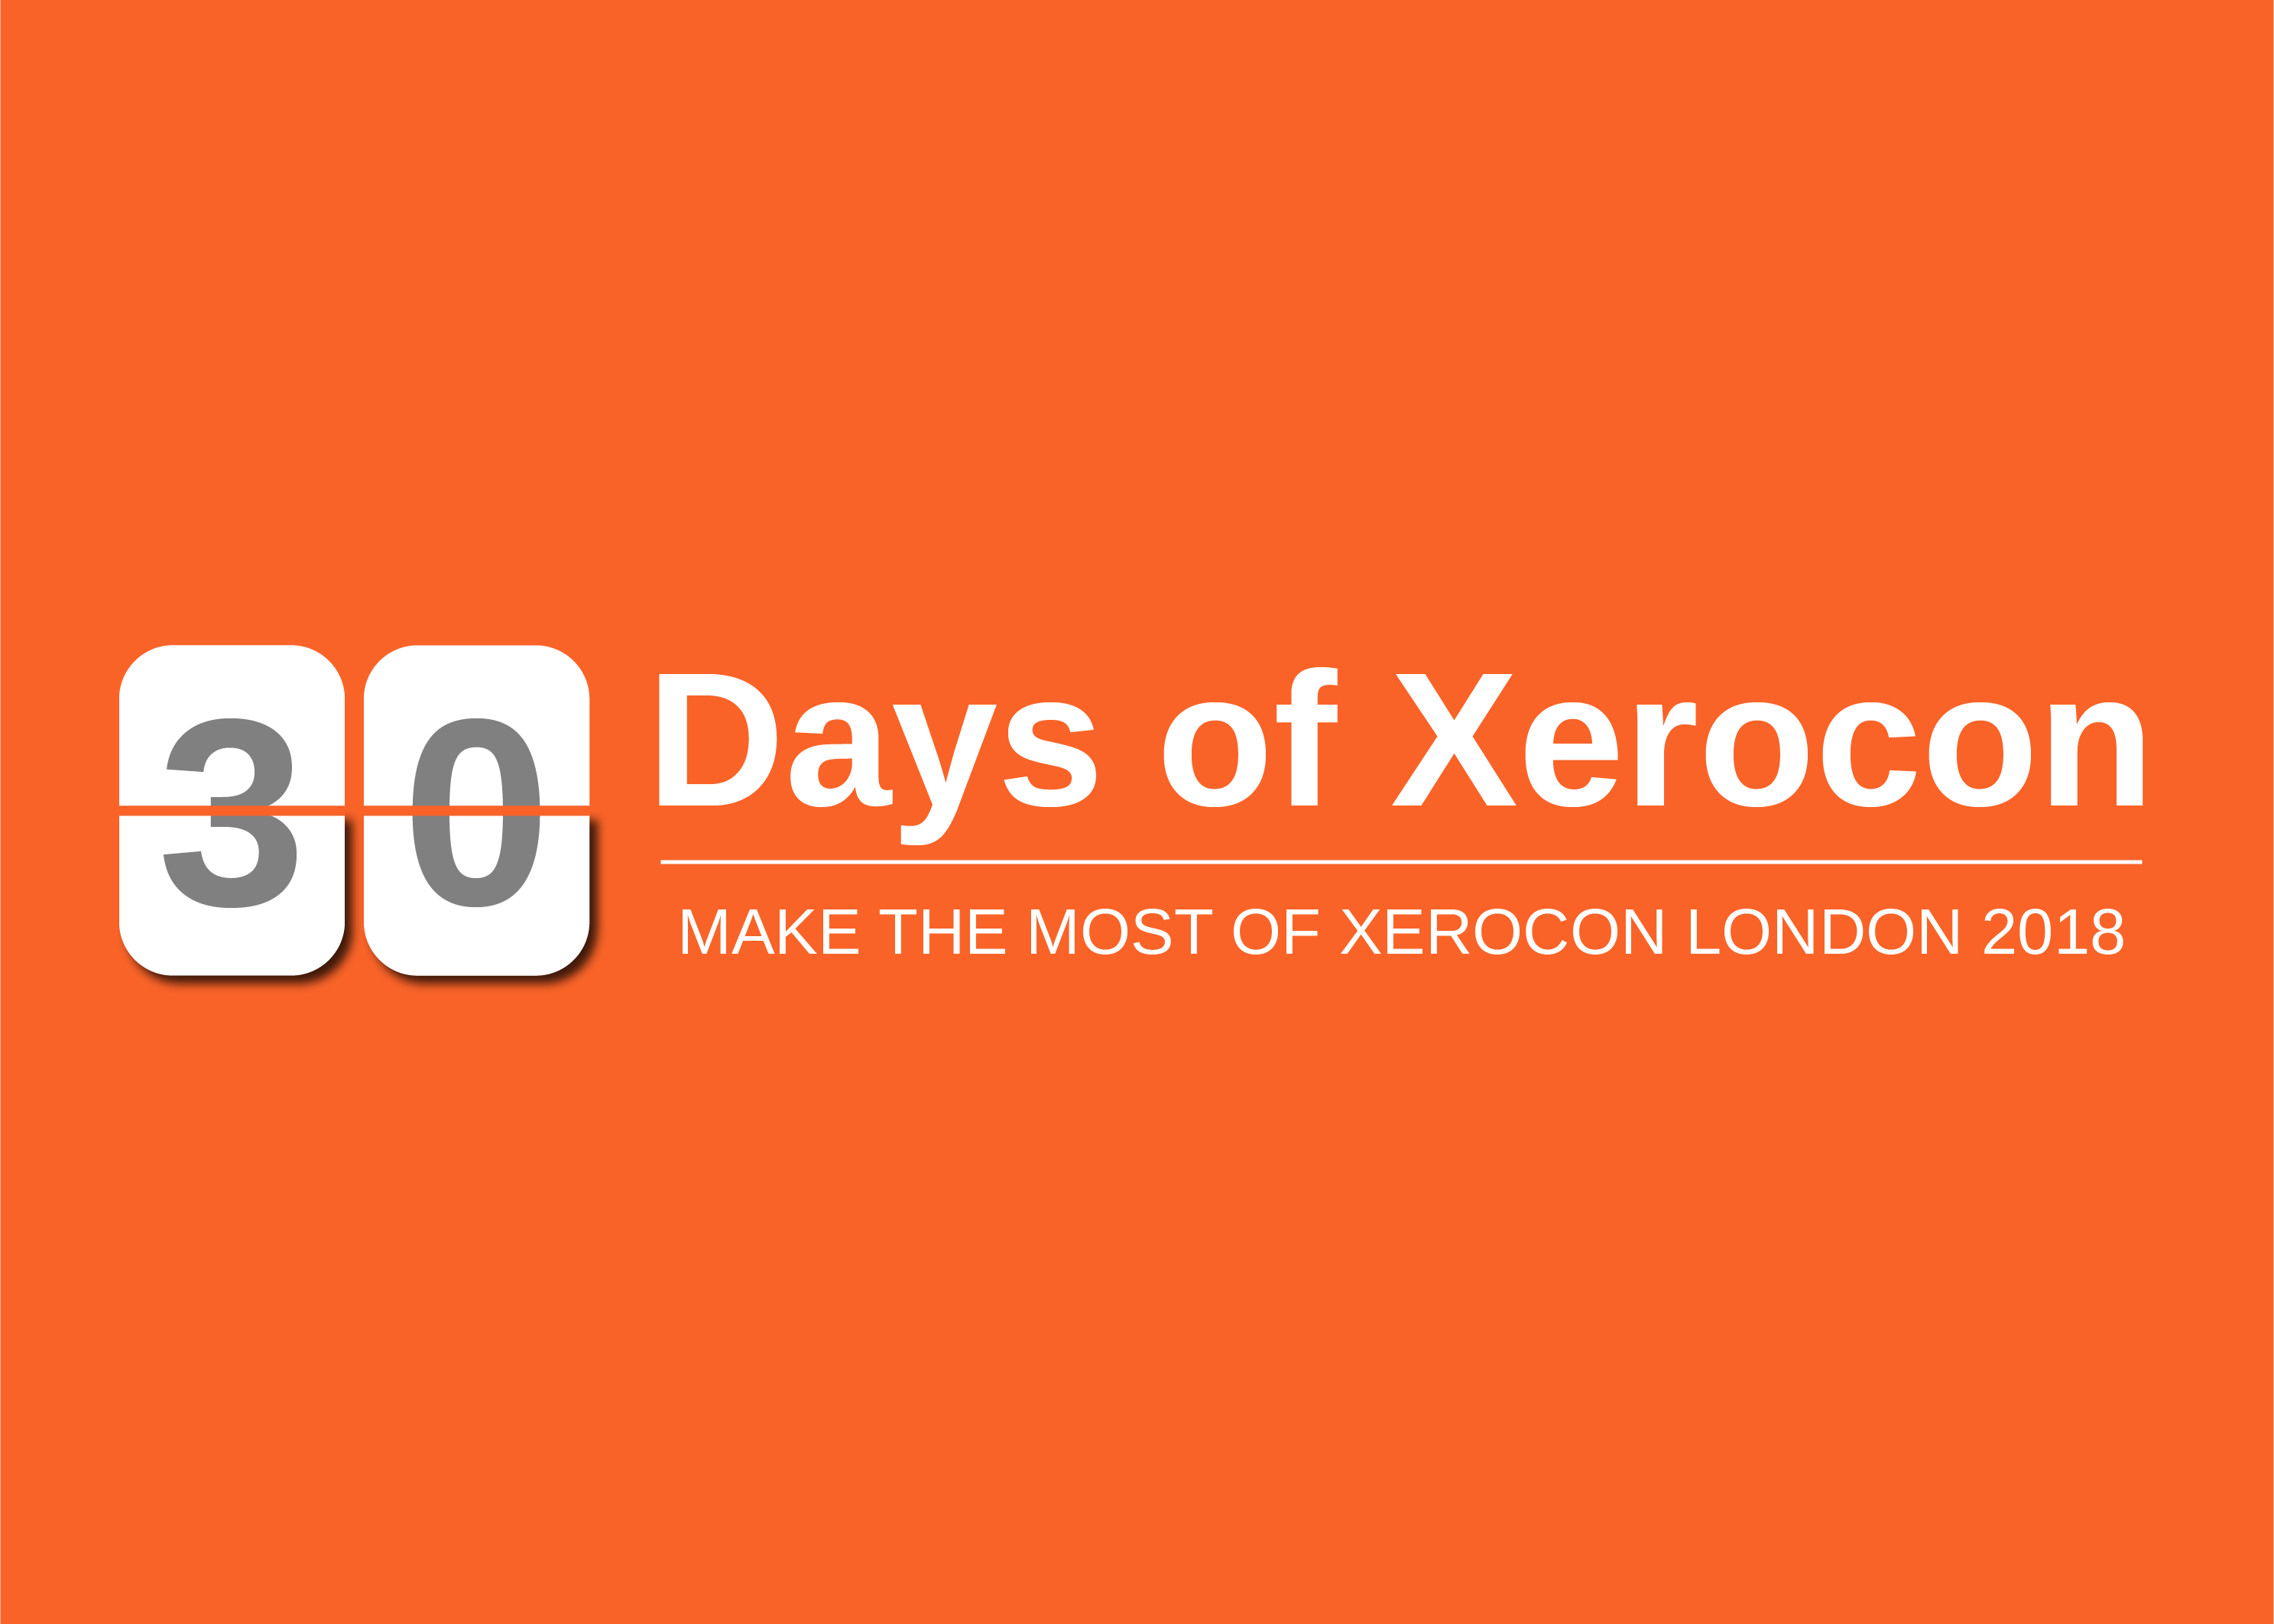 30 Days of Xerocon: What to do in the 30 days before Xerocon London 2018